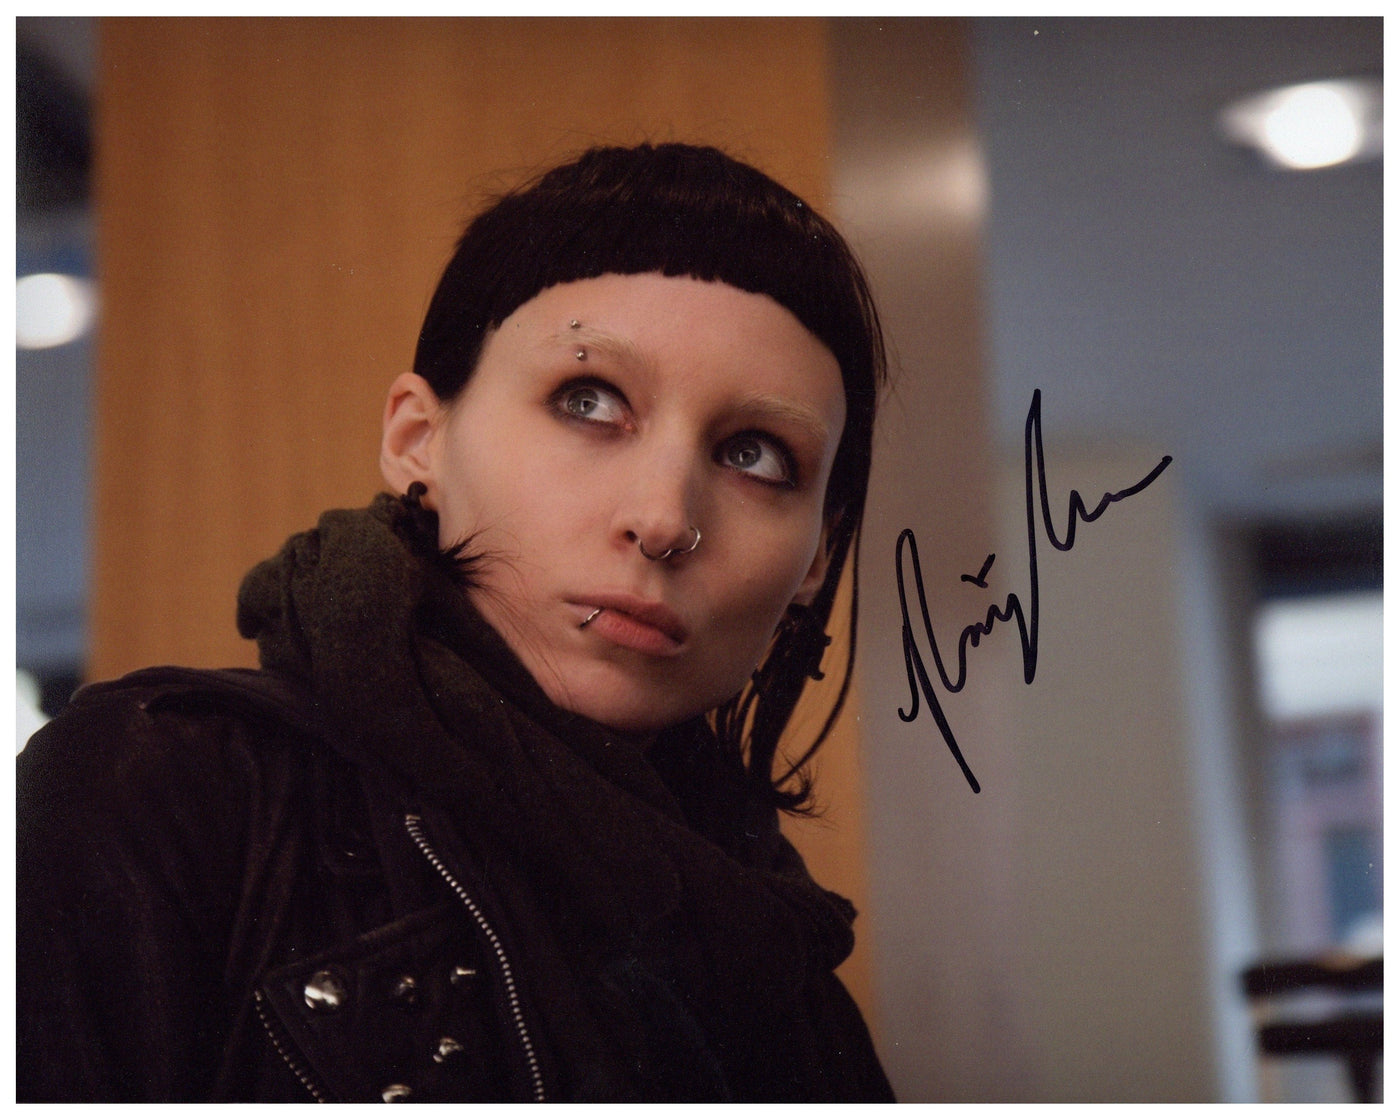 Rooney Mara Signed 8x10 Photo The Girl with the Dragon Tattoo Autographed ACOA 2